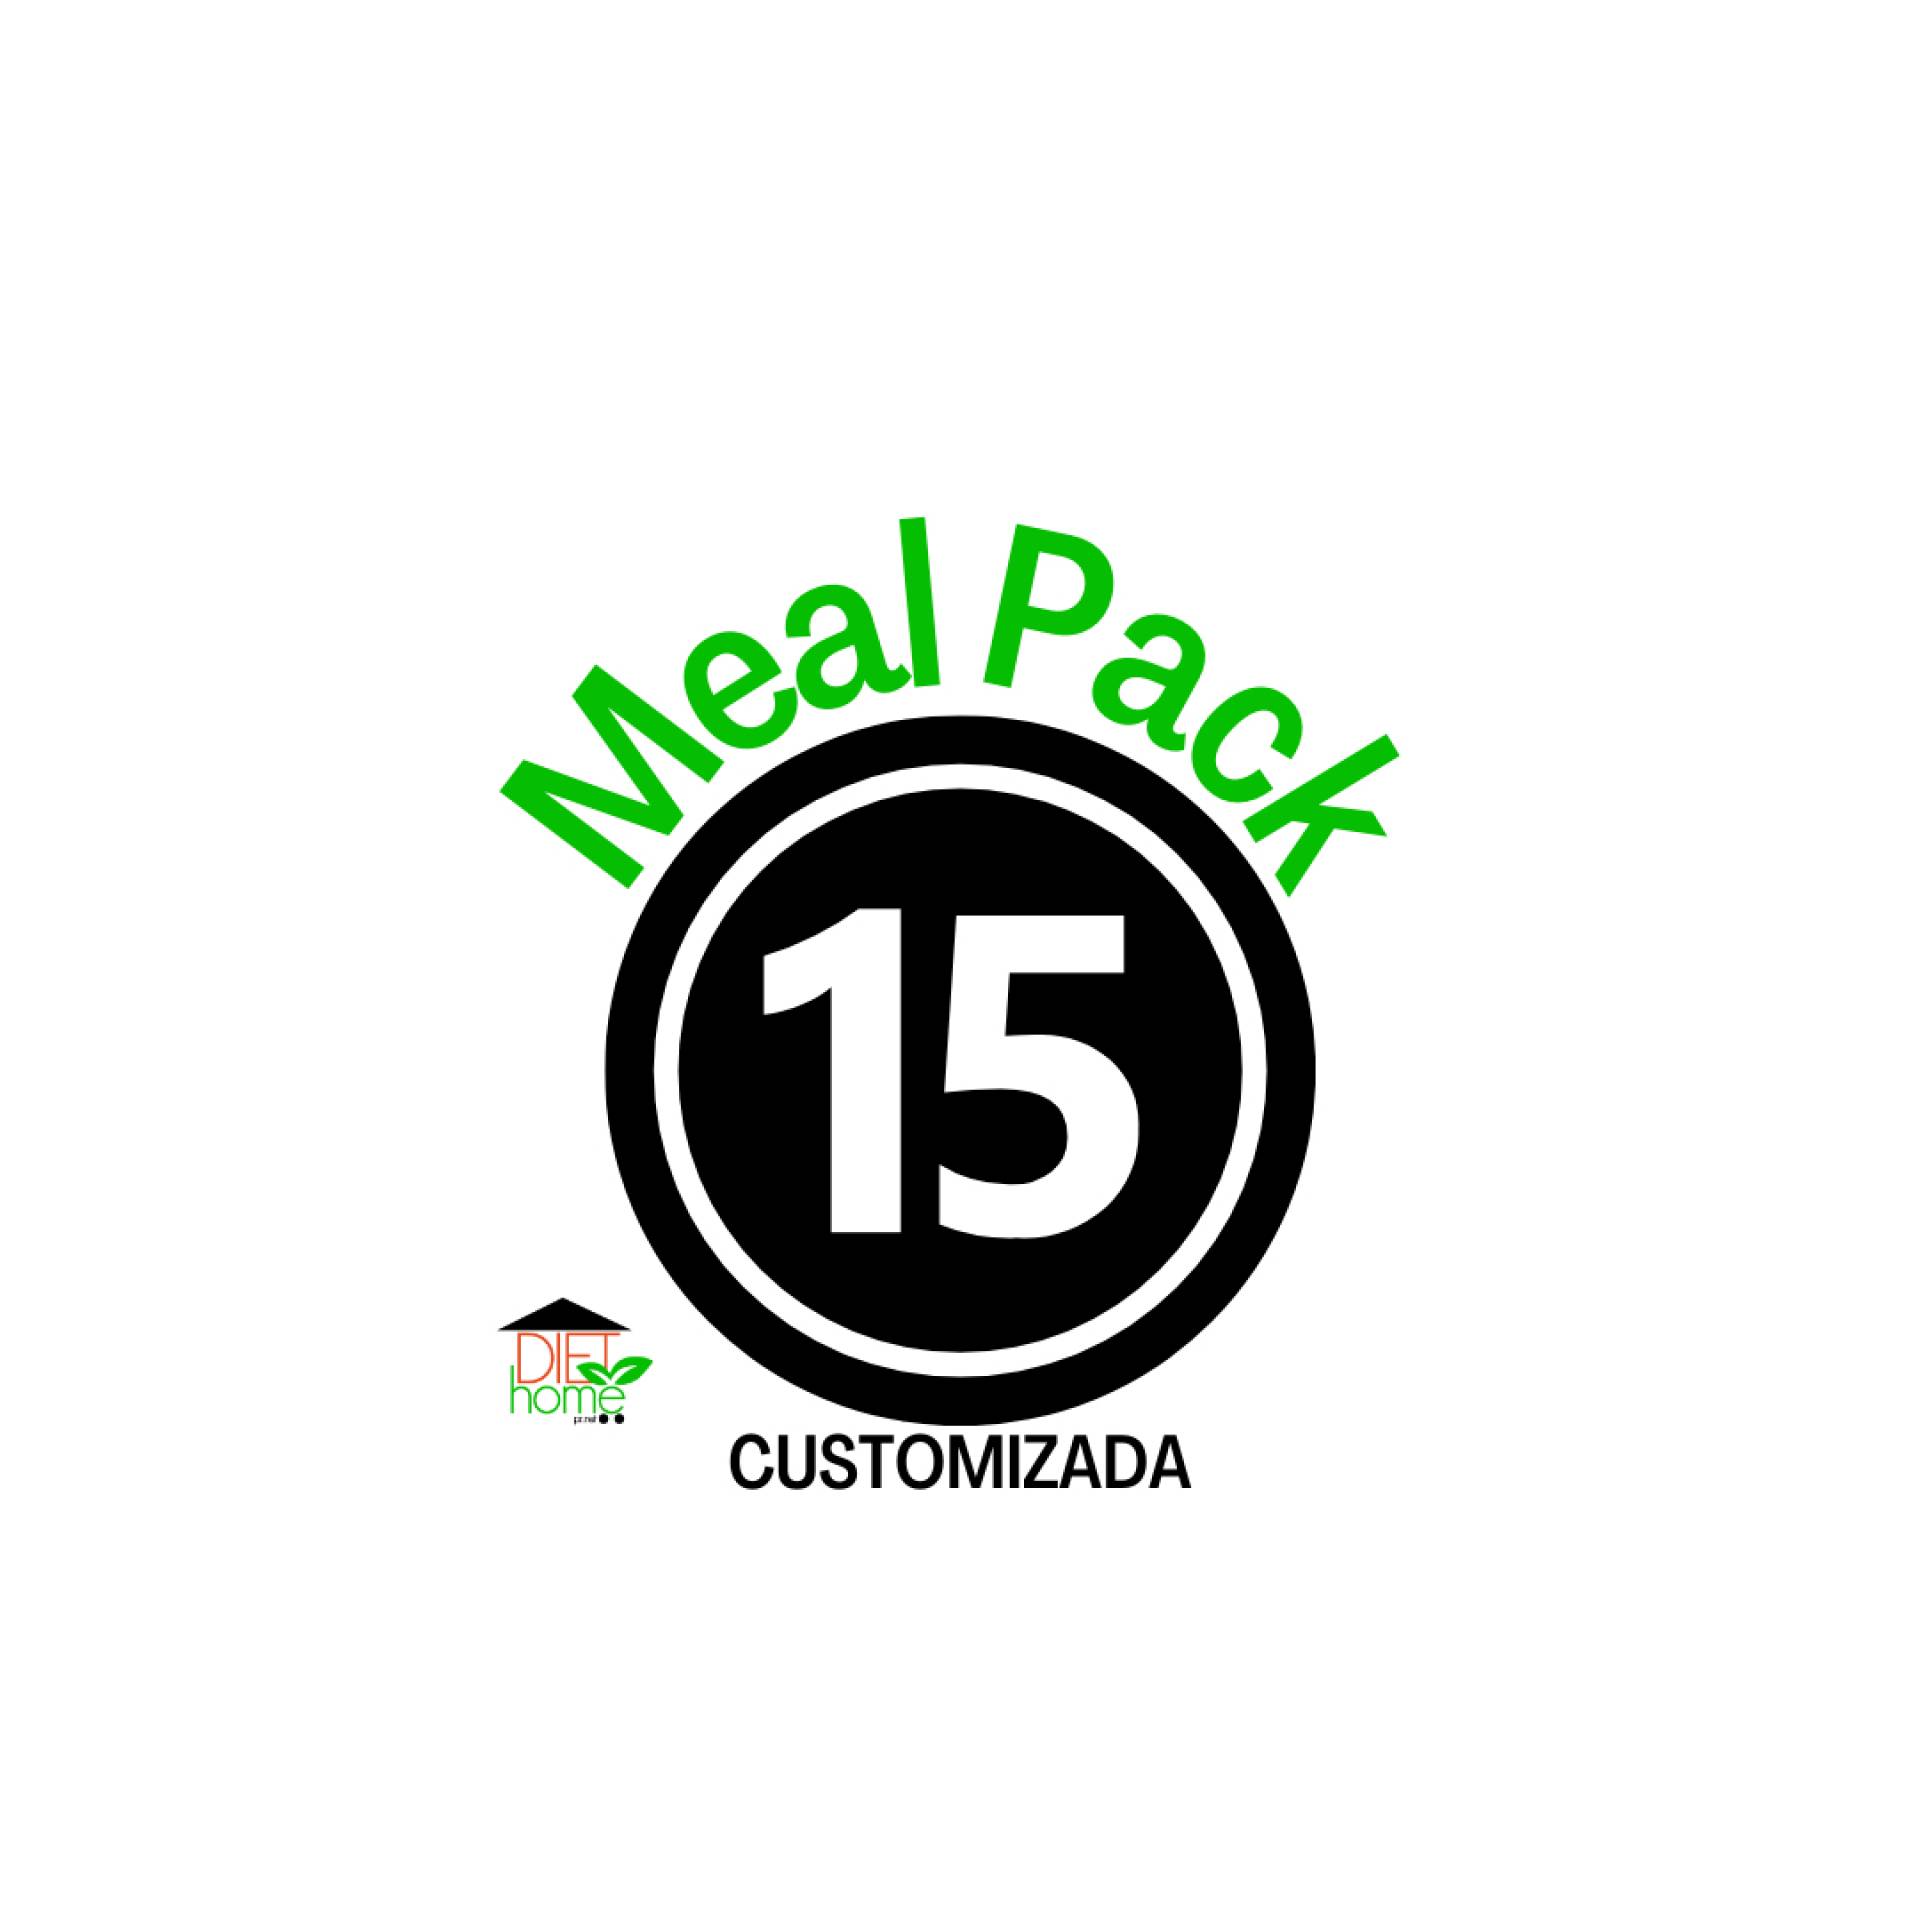 *15 Meal Pack Zona